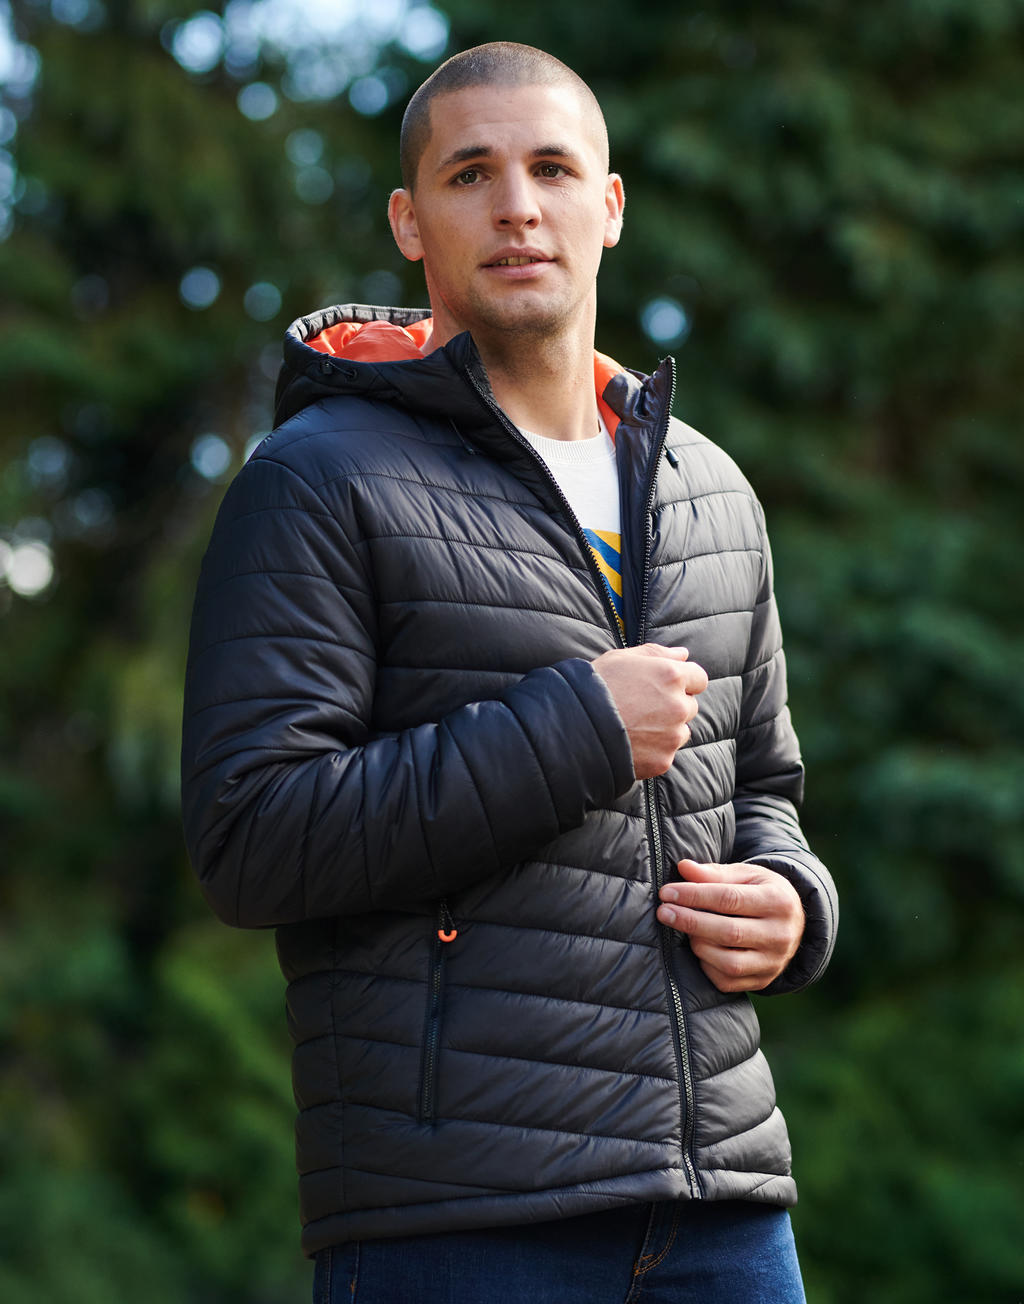  Thermogen Powercell 5000 Thermal Jacket in Farbe Black